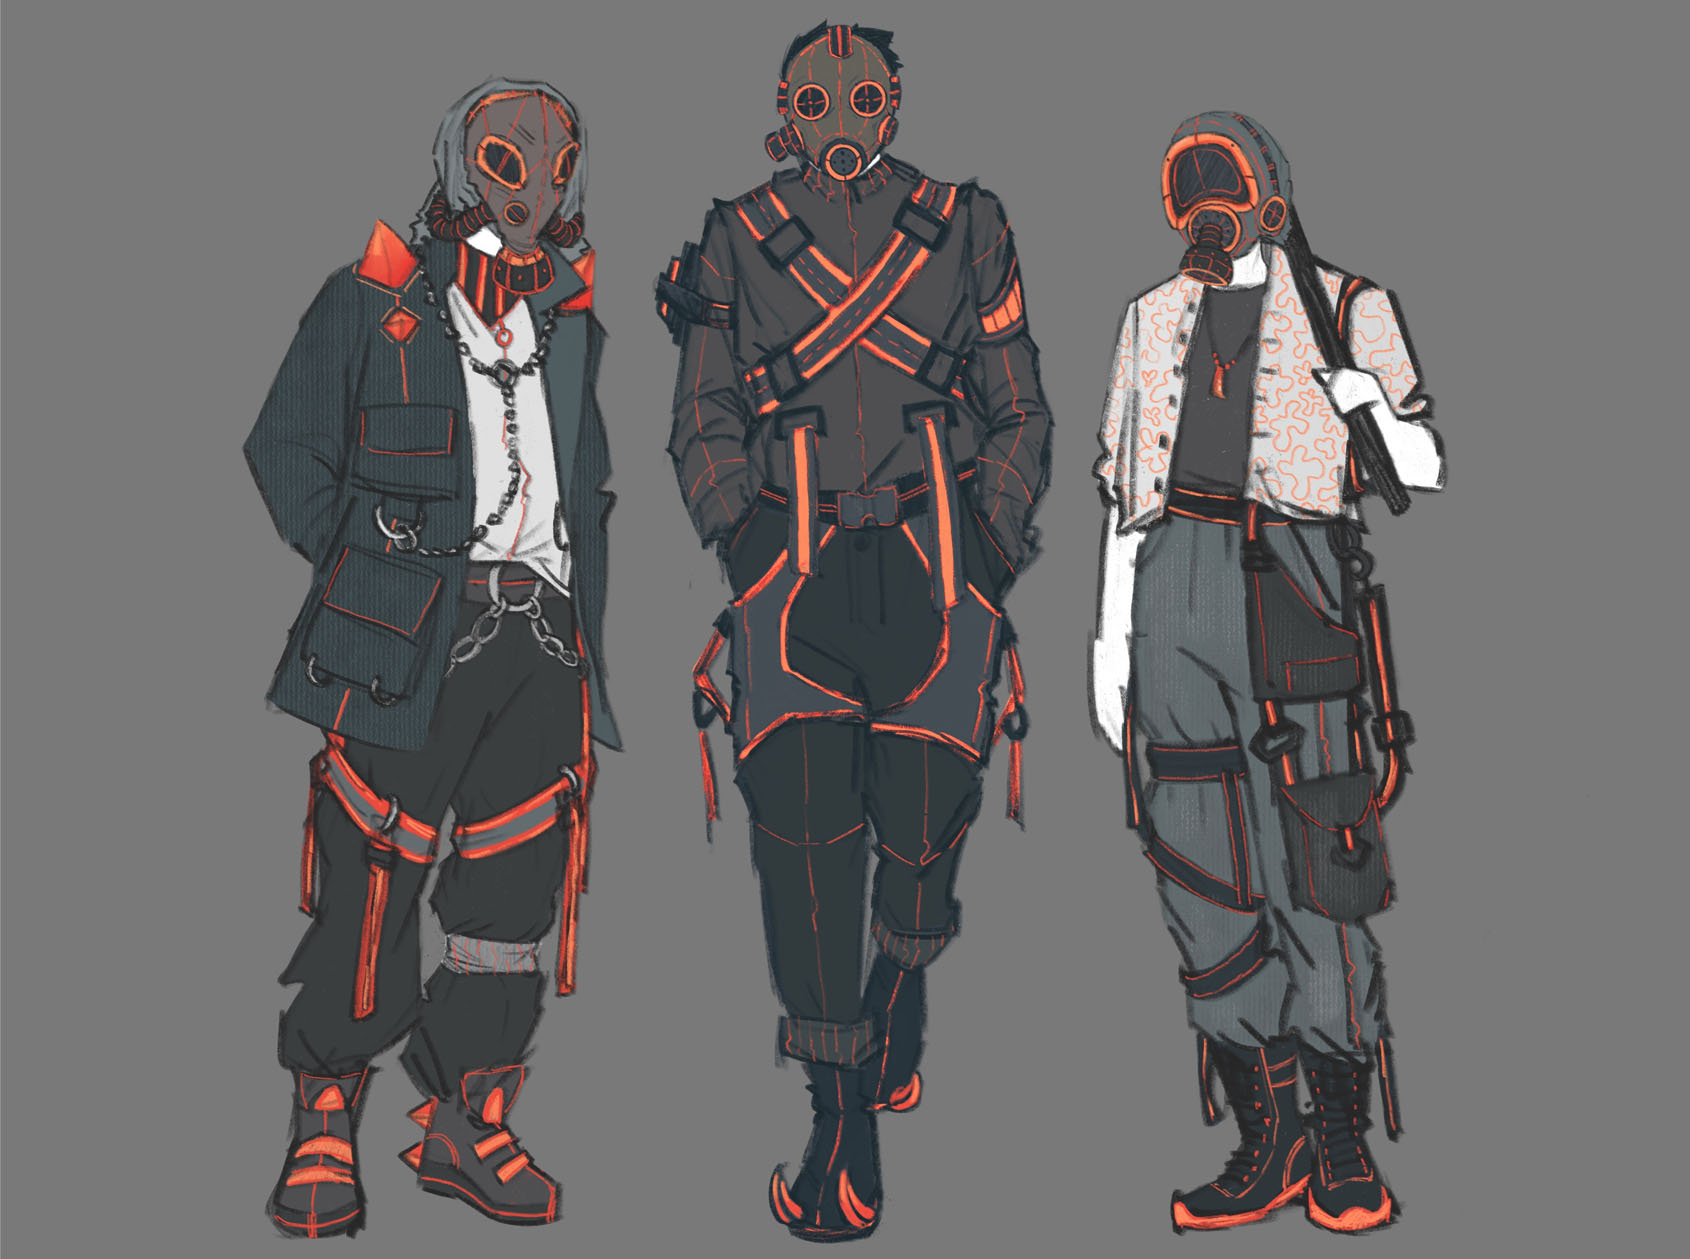 An illustration of three enemy mob characters by Indi B. They wear grey and orange military fashion uniforms and gas masks.